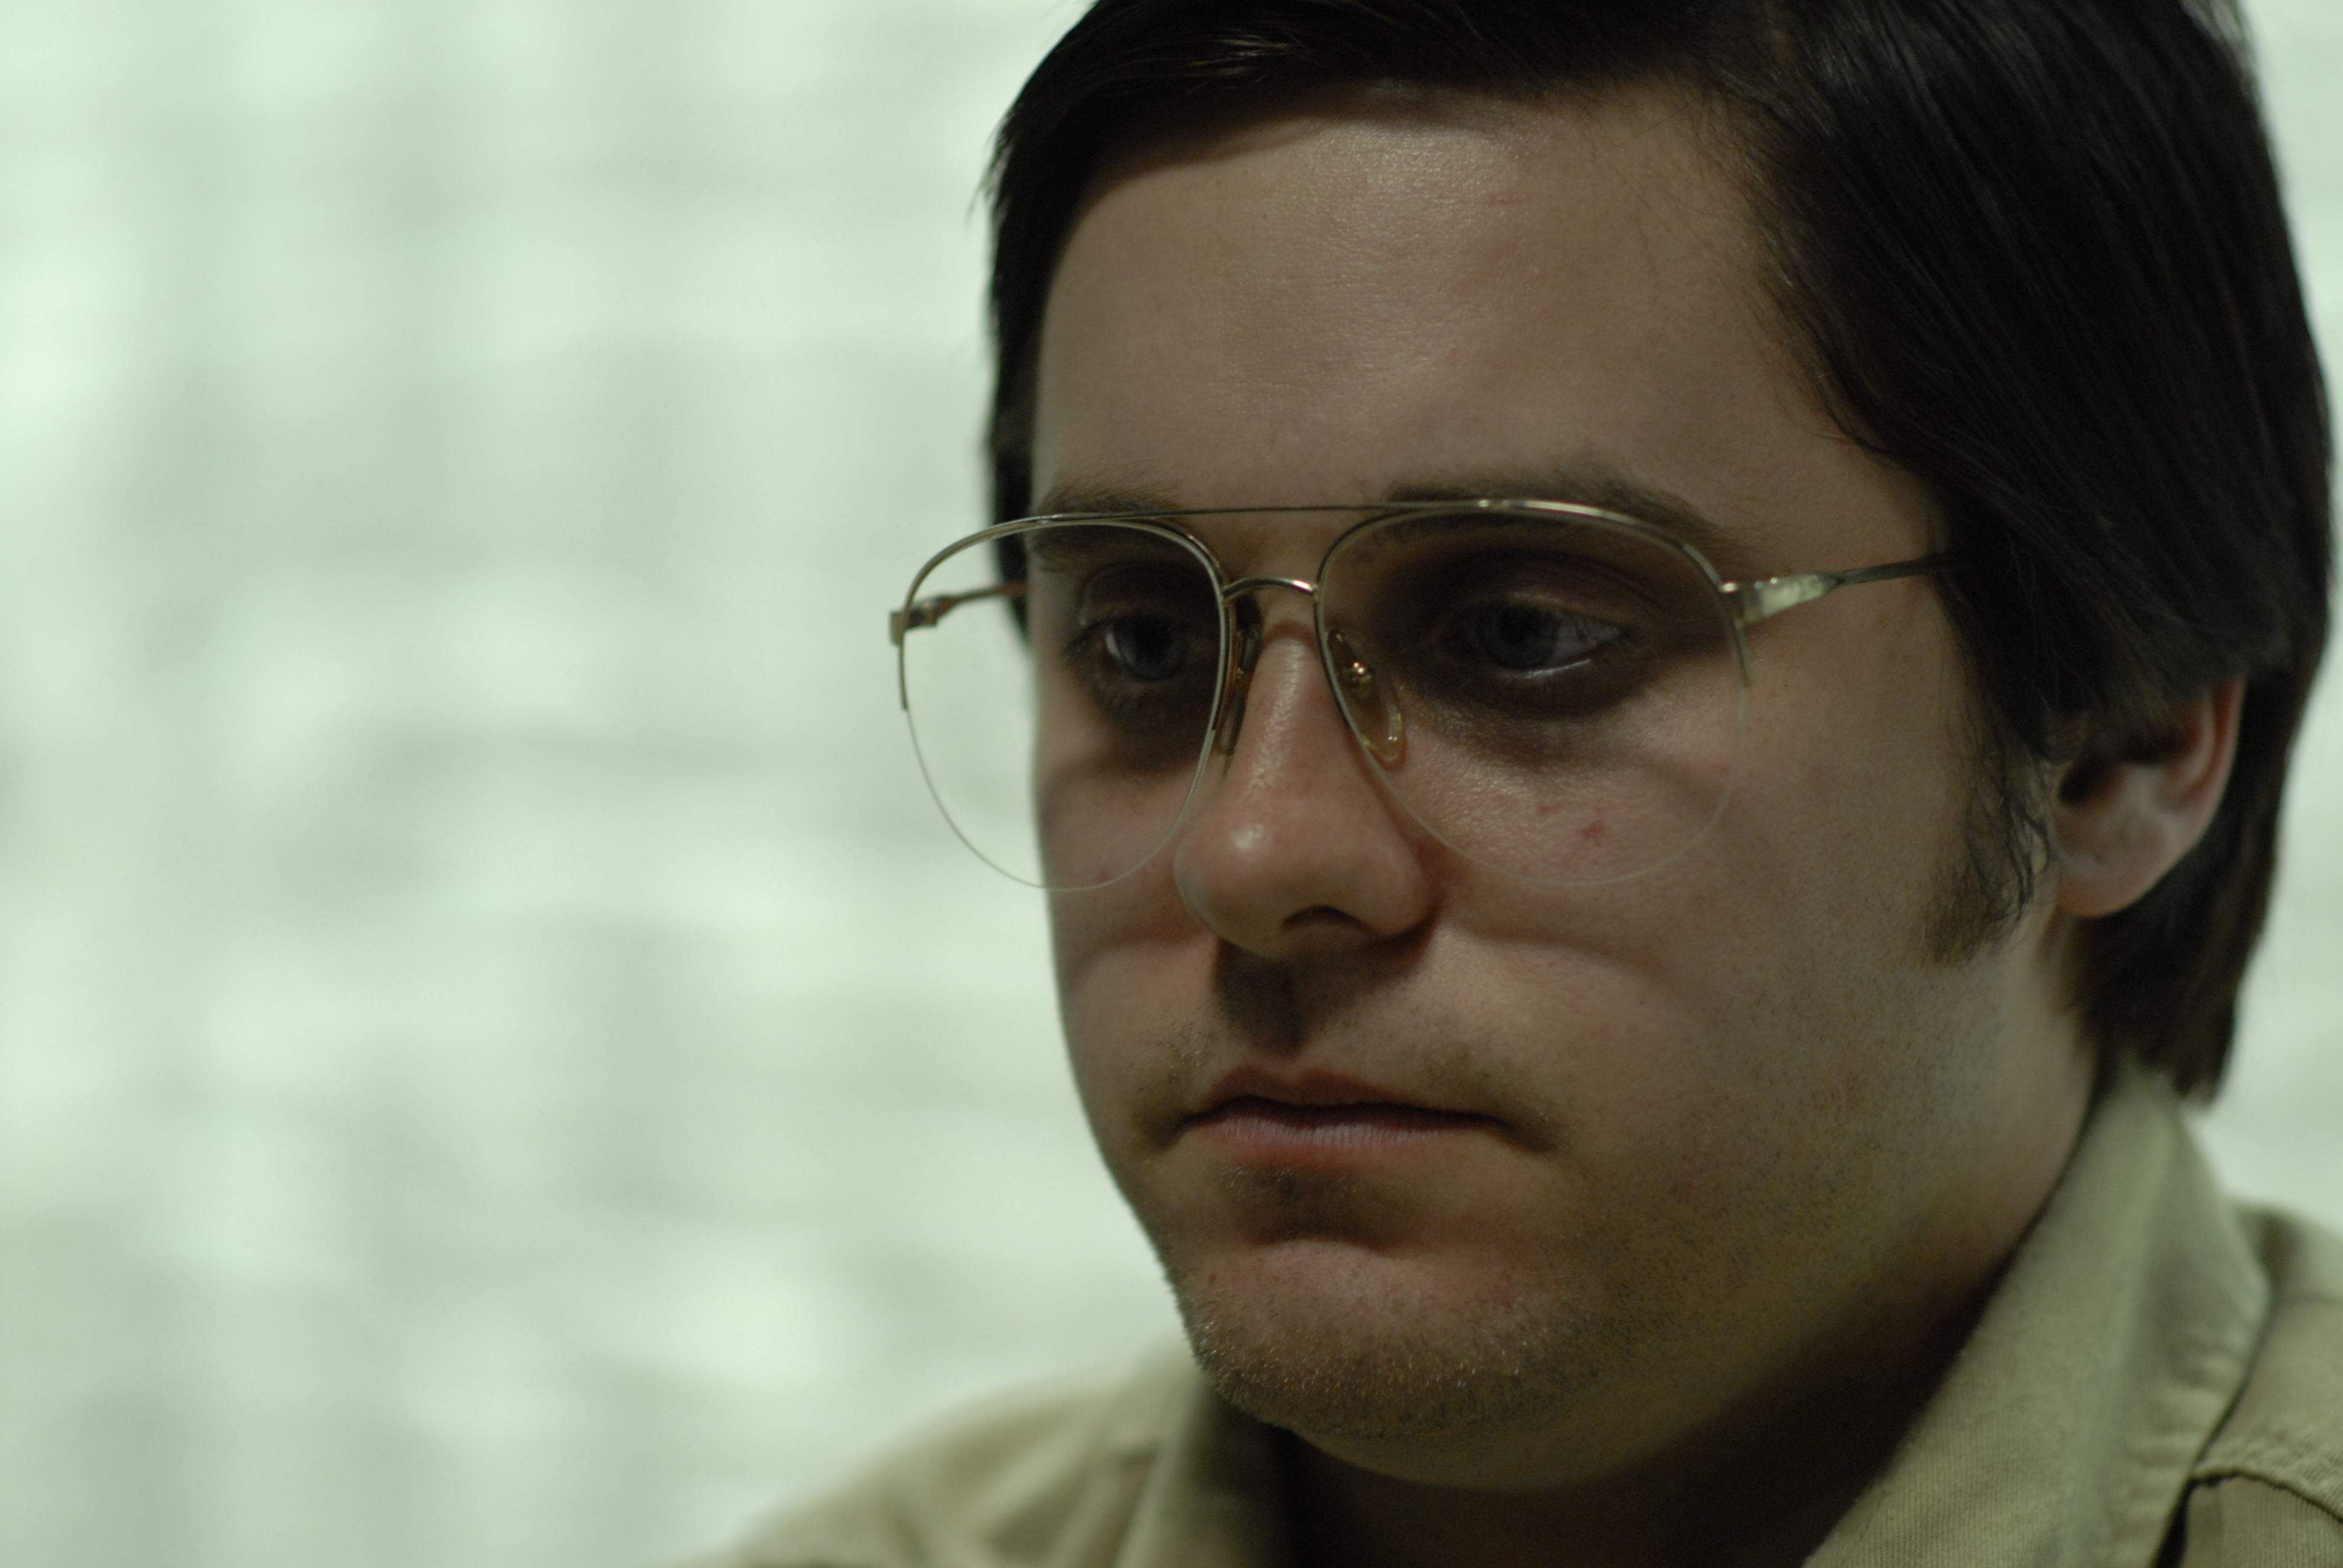 Jared Leto as Mark David Chapman in Peace Arch Entertainment's Chapter 27 (2008)